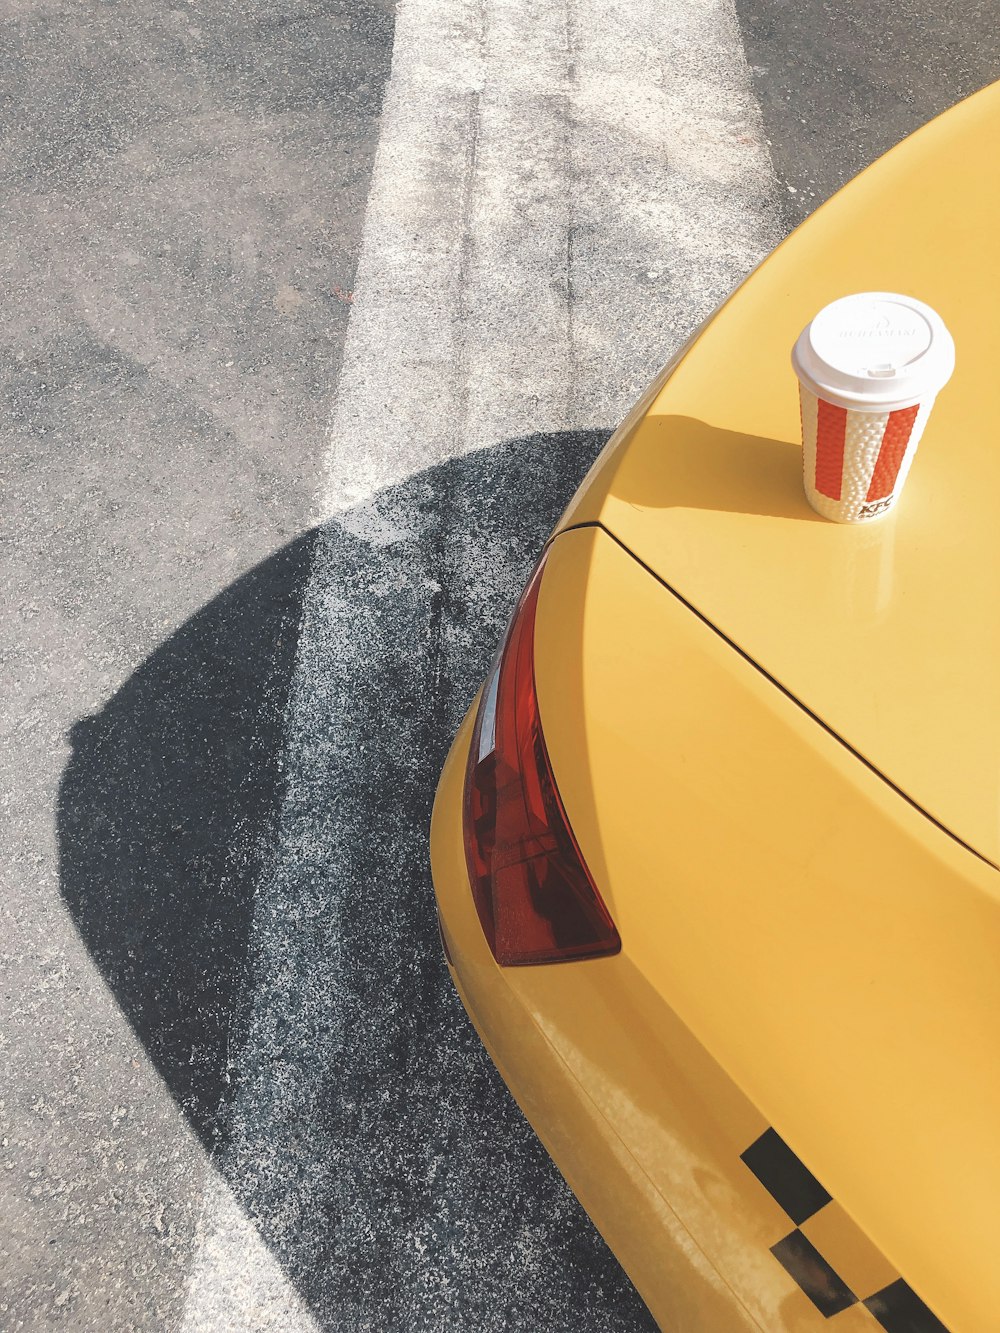 red and white disposable cup on yellow car hood